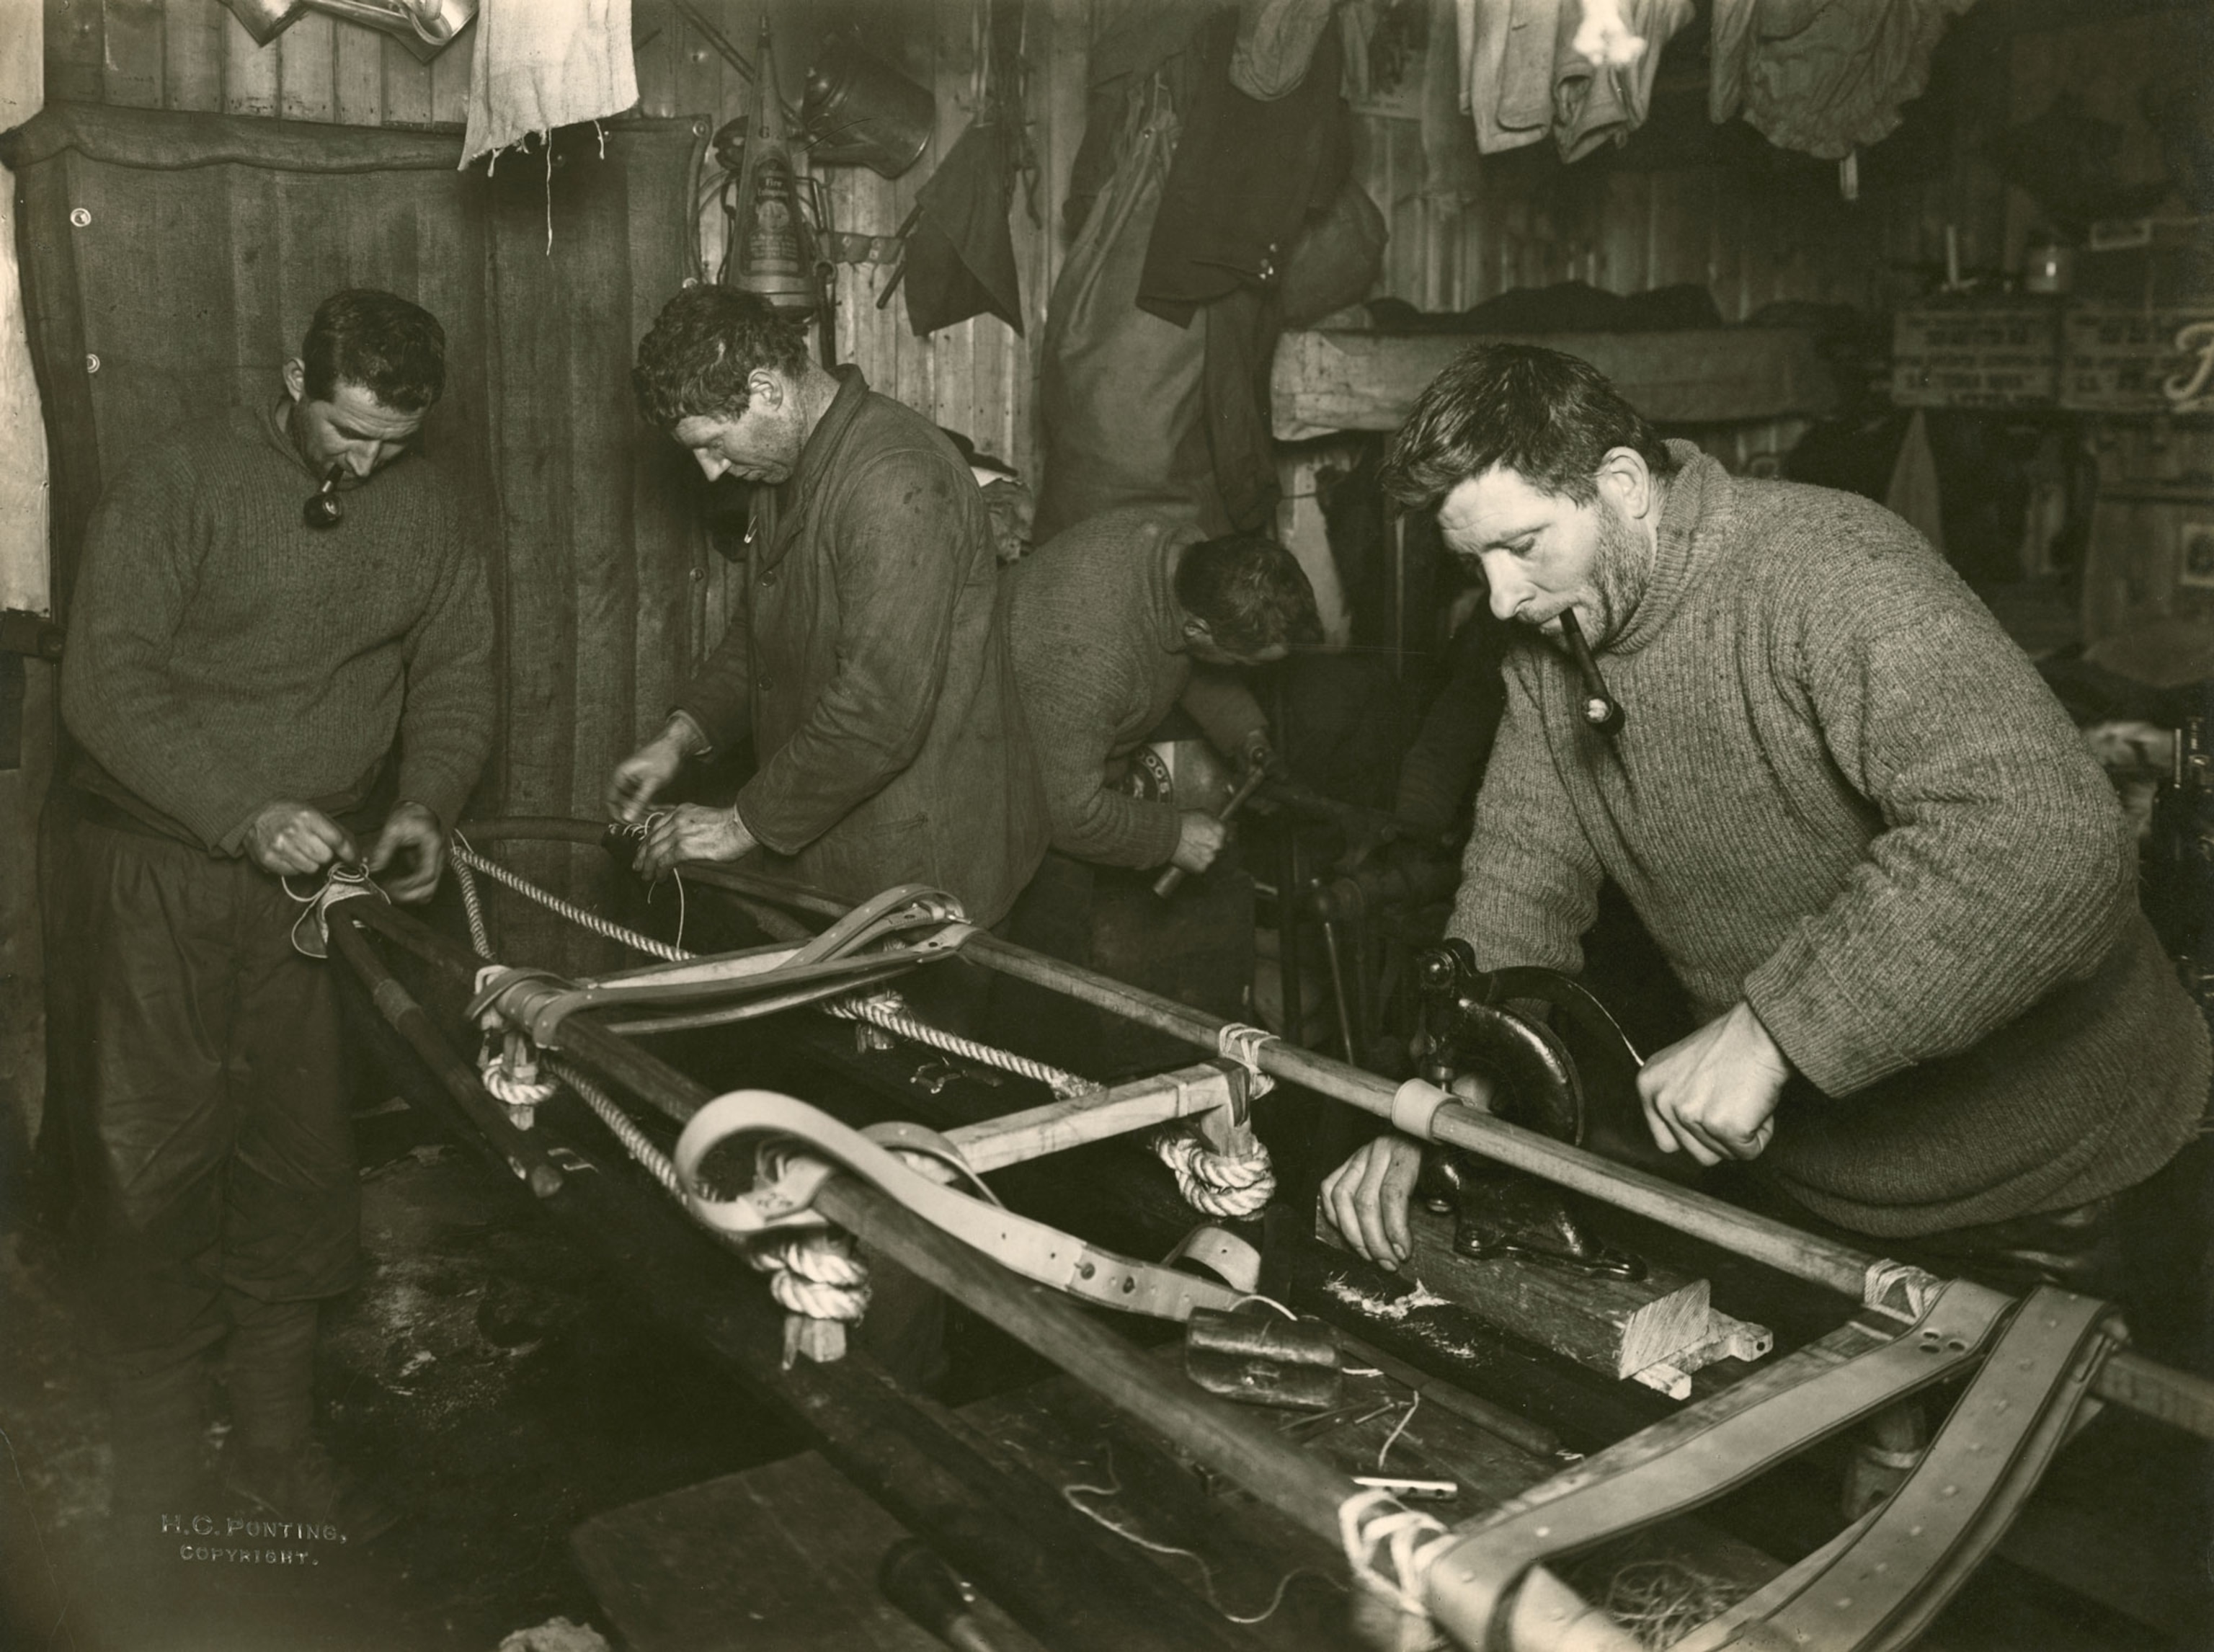 team members put together a sledge during Captain Scott's expedition